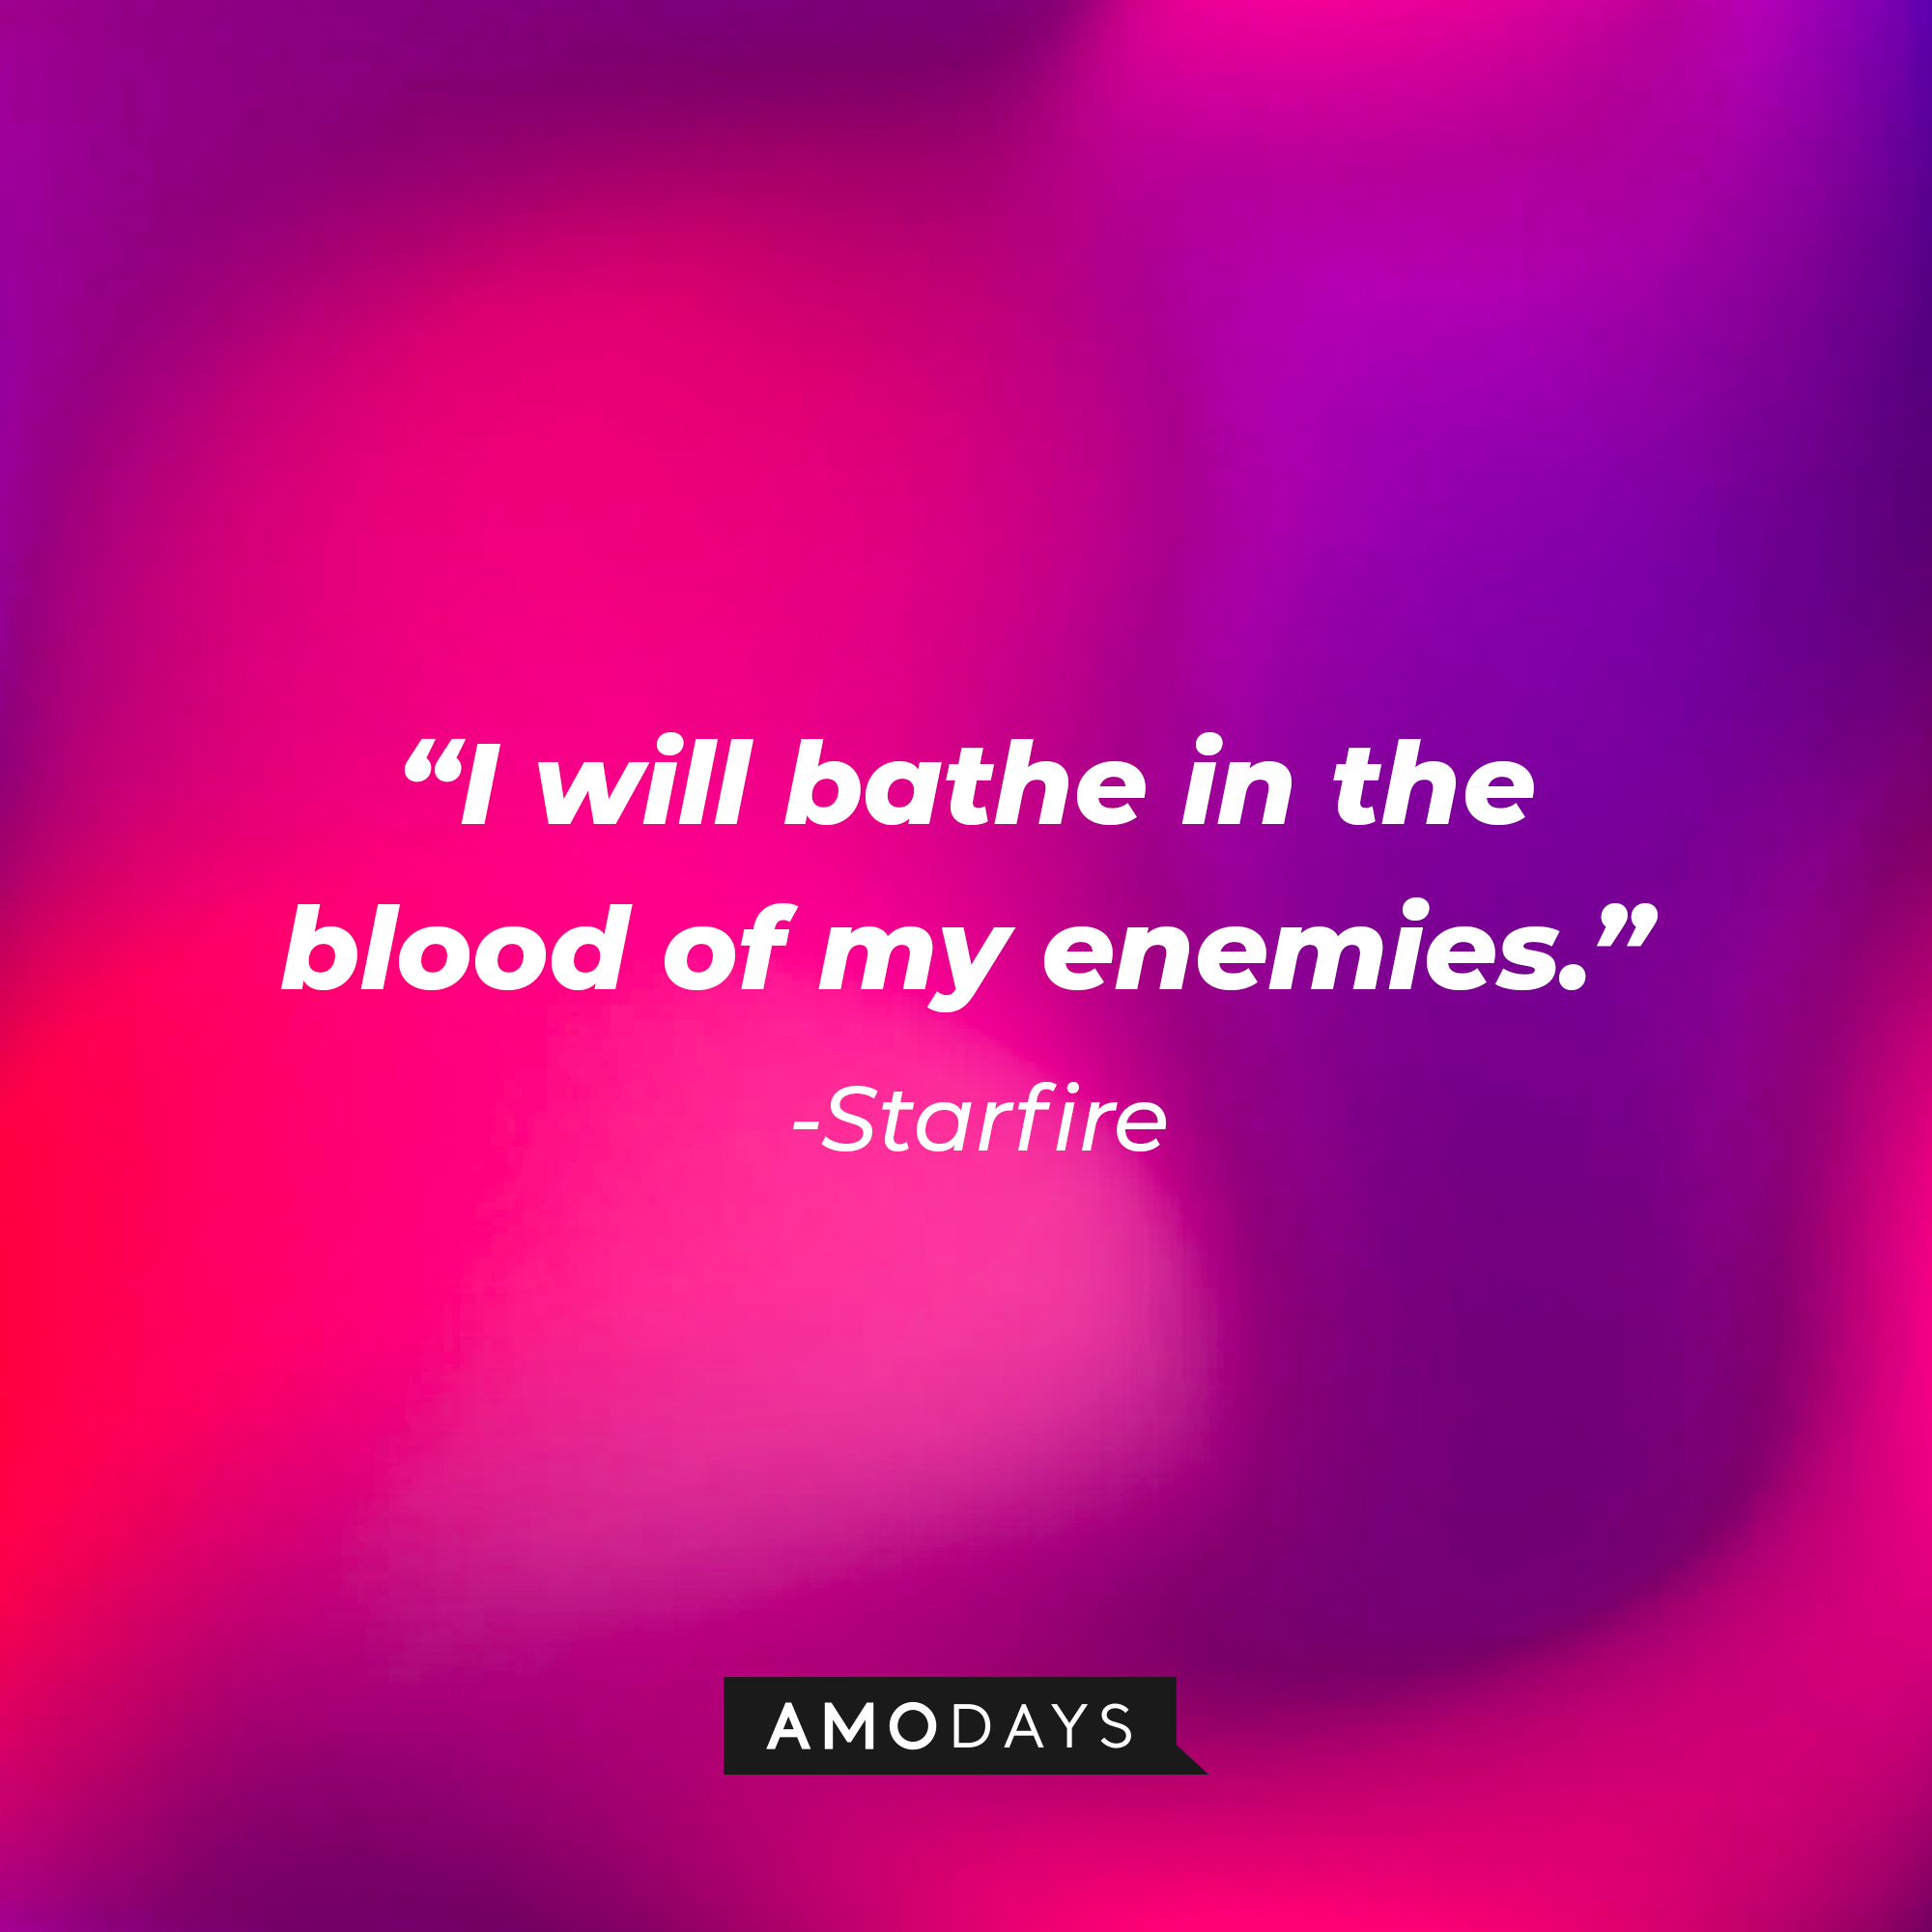 Starfire’s quote: "I will bathe in the blood of my enemies."  | Source: AmoDays